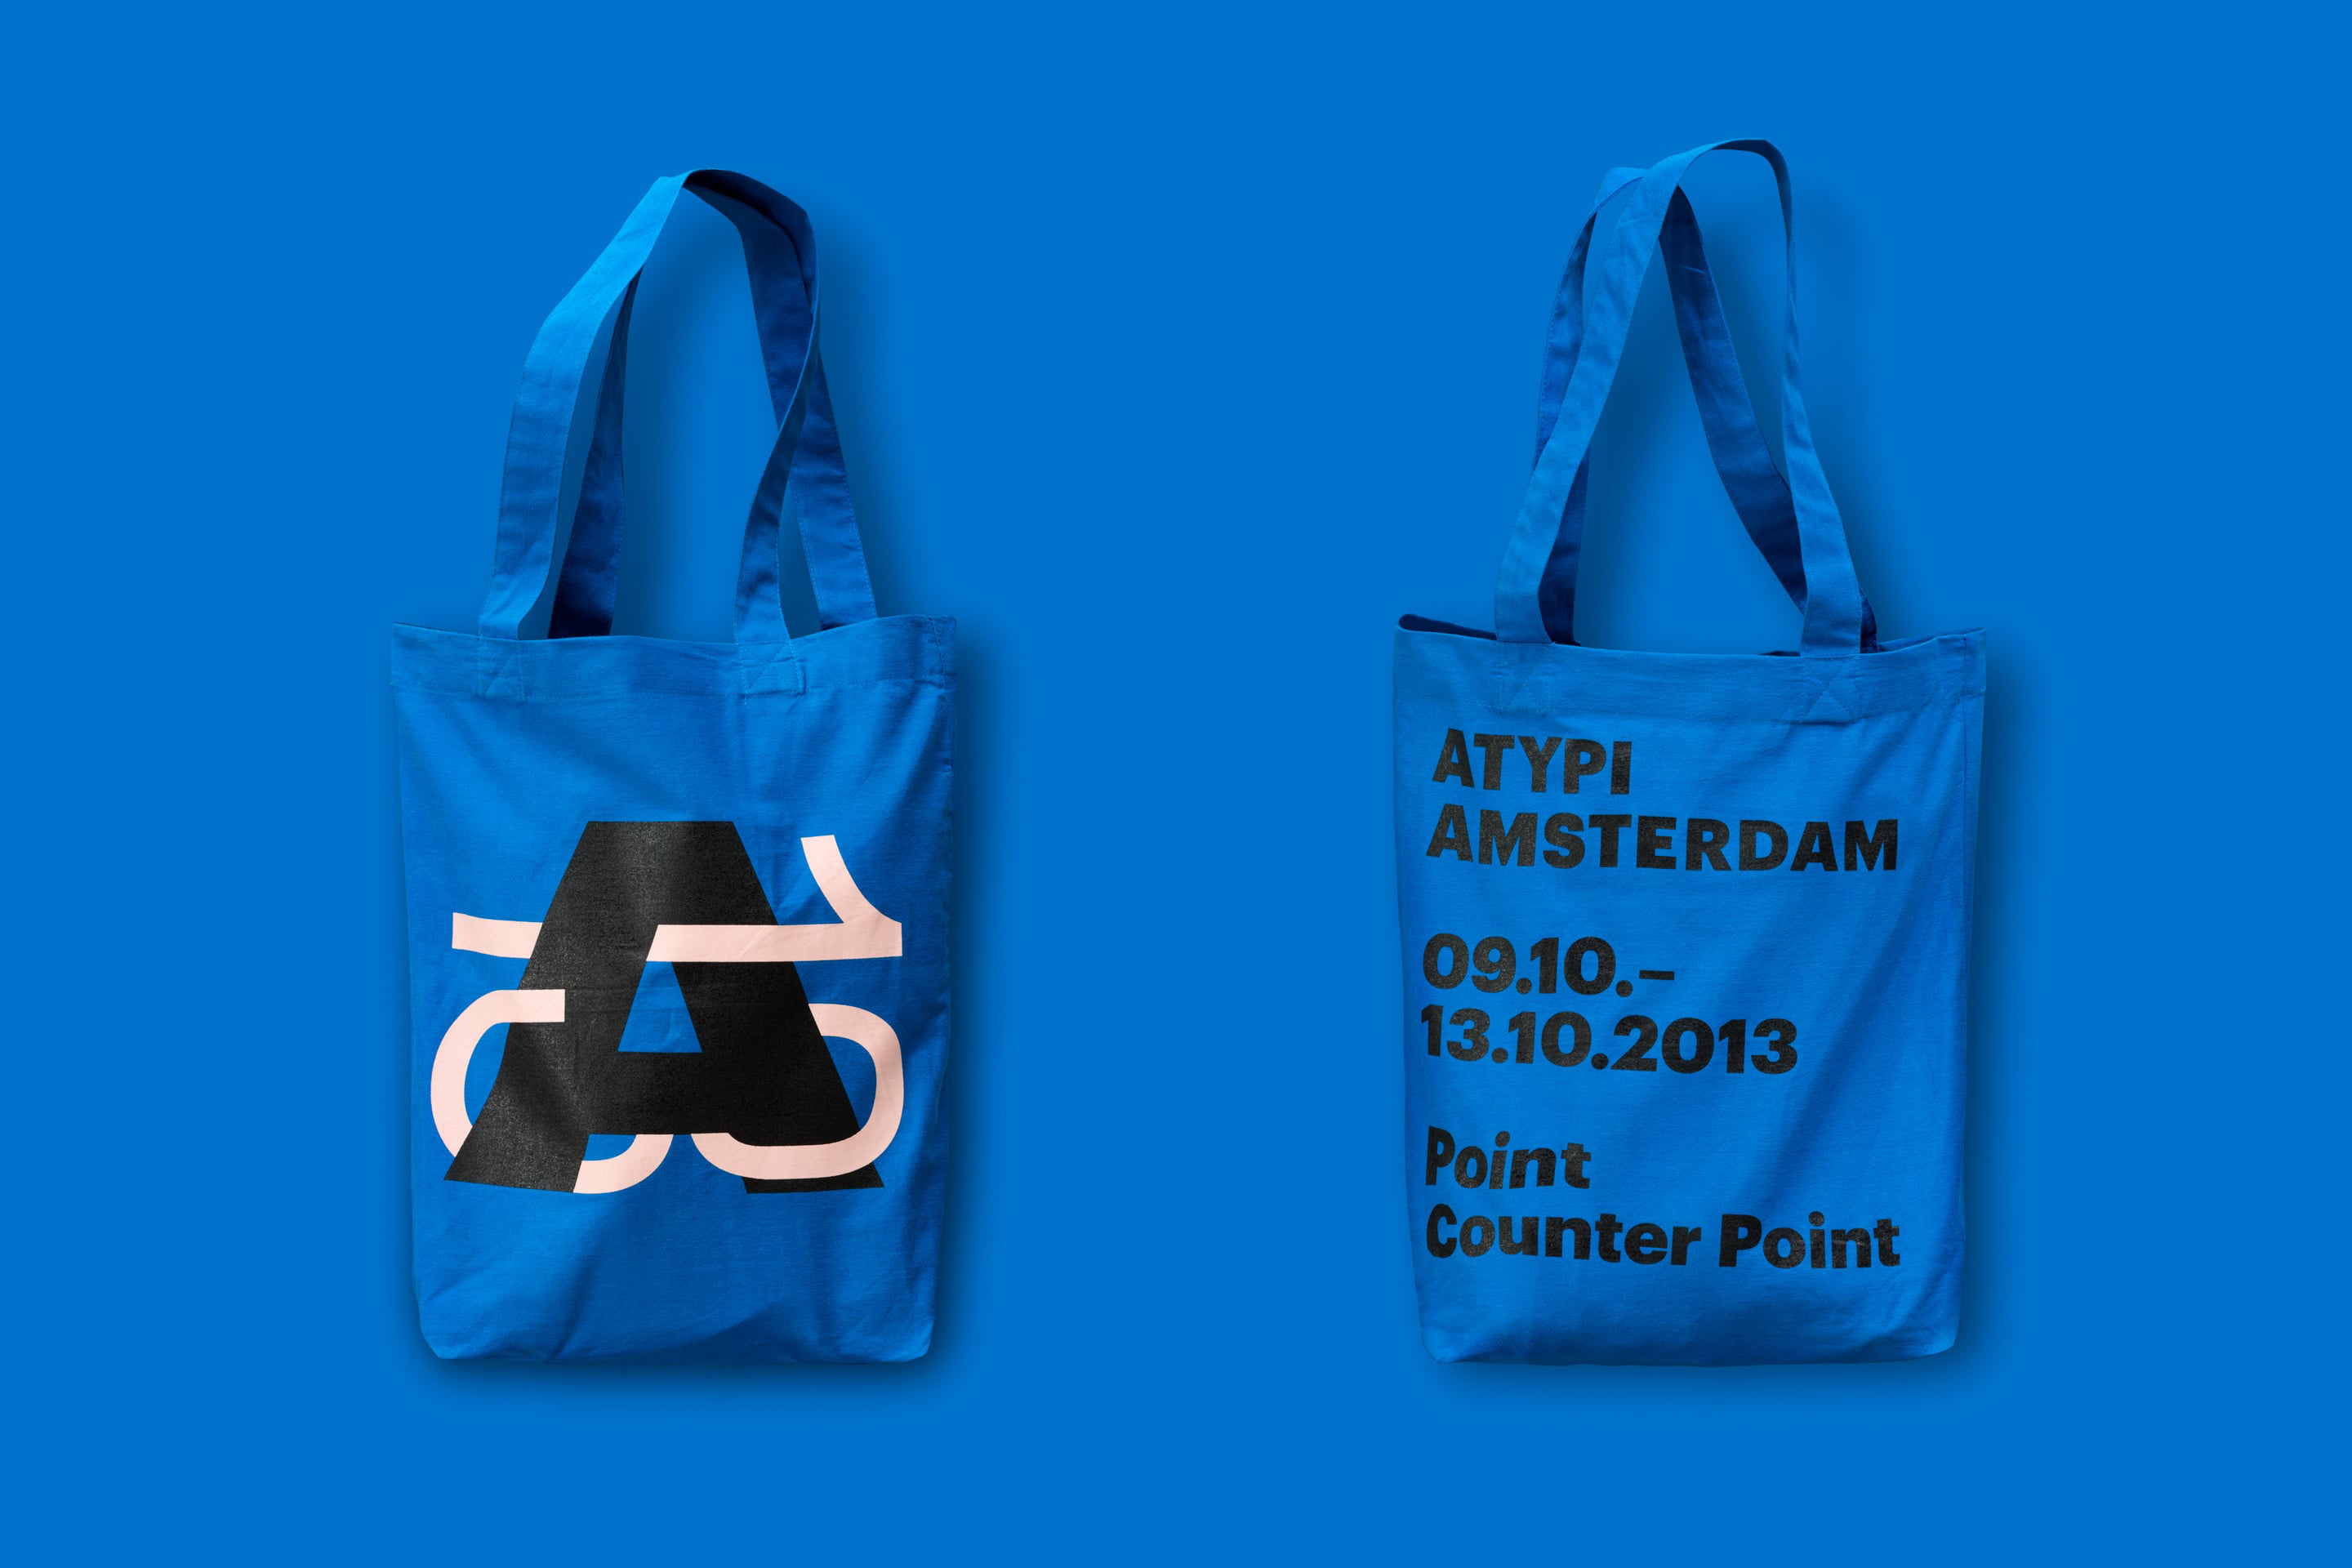 studio dumbar event design branding for ATypI the international type association bad design with logo and dates